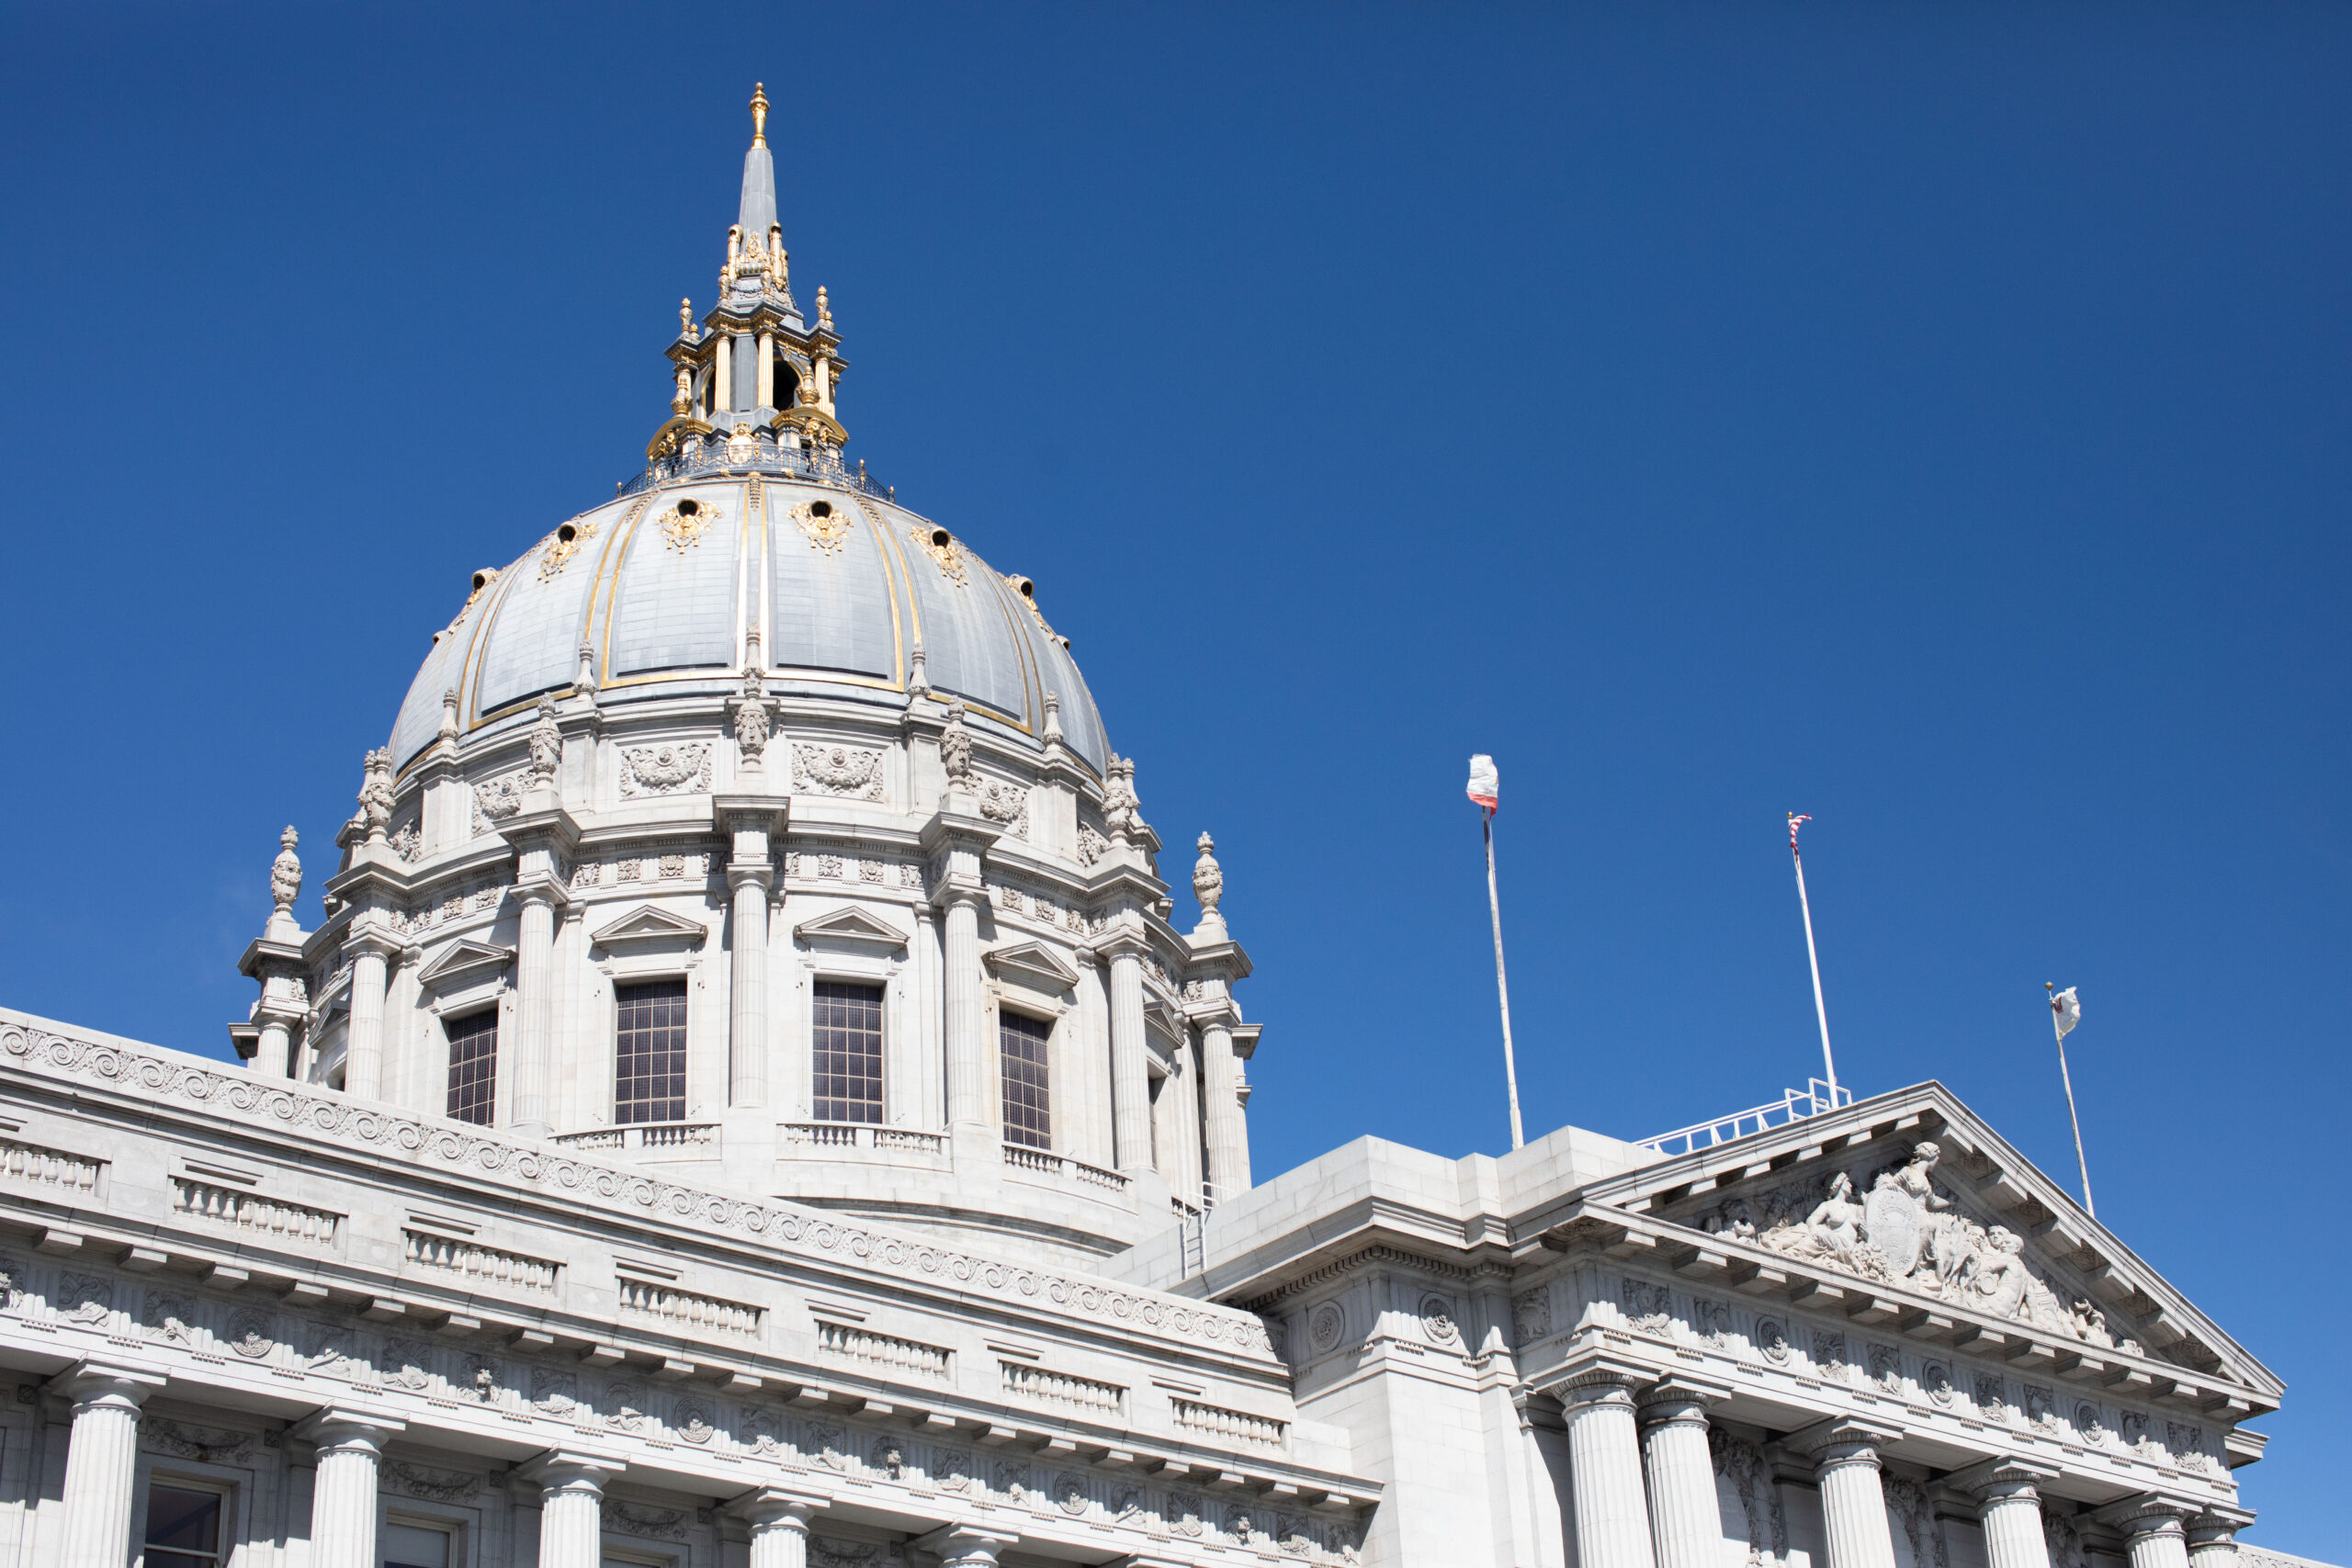 San Francisco’s Deficit Swells to $780M in Latest Sign of Budget Distress